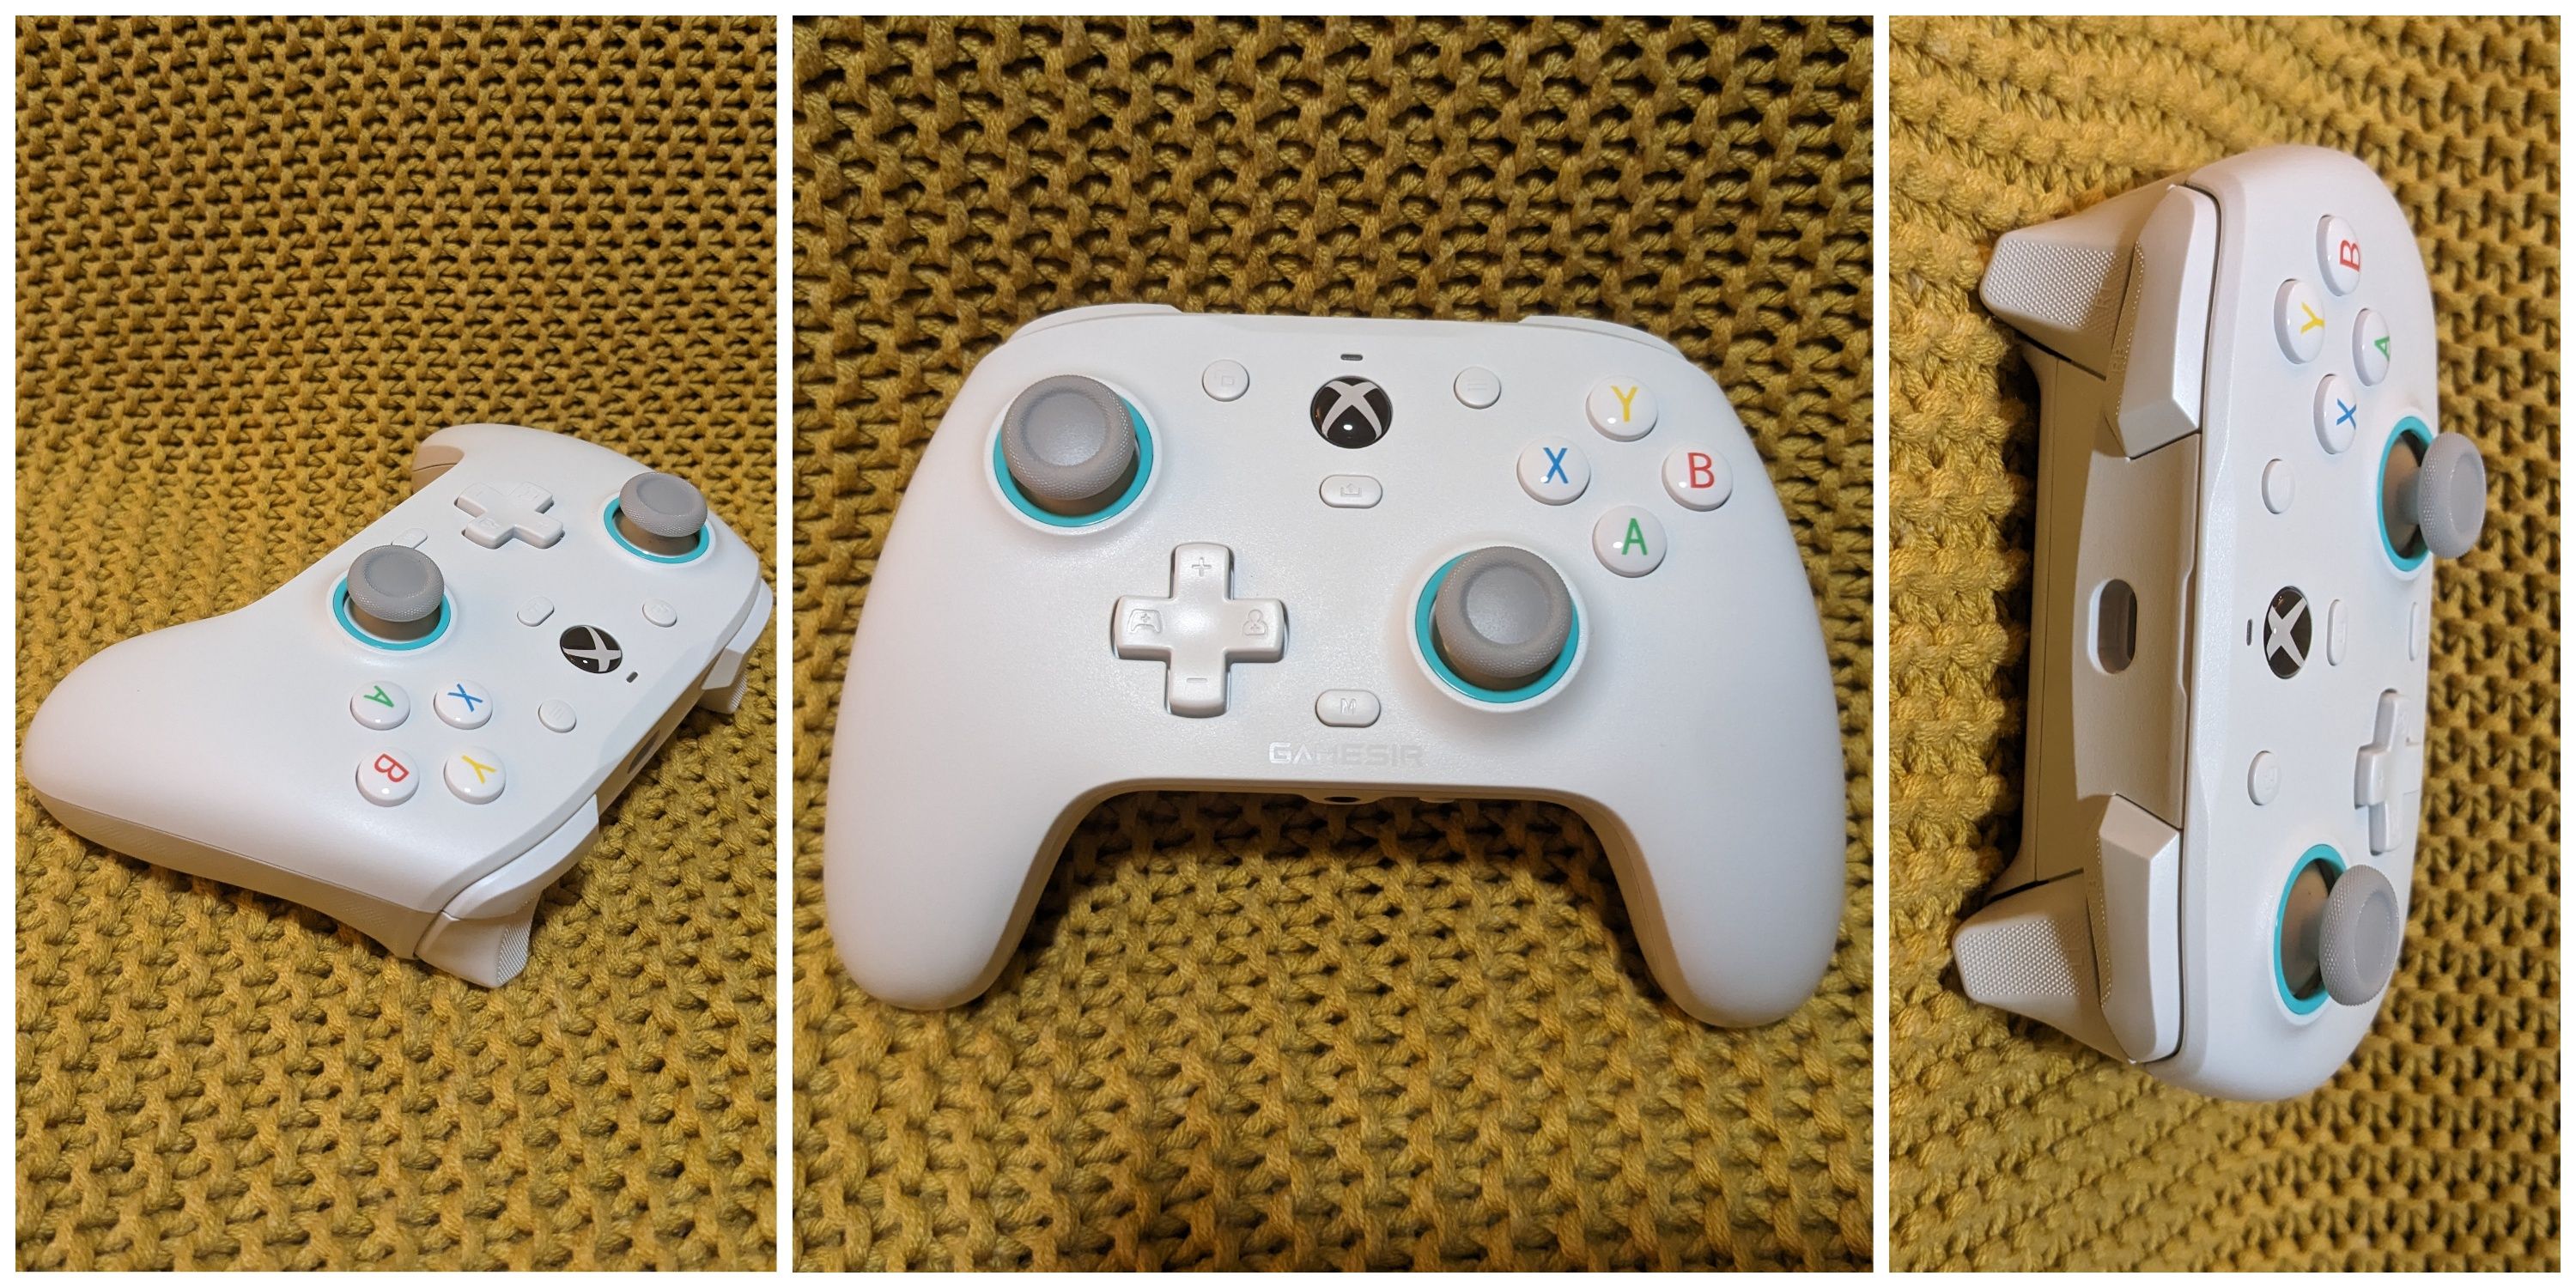 GameSir G& SE: Xbox licensed controller with Hall Effect